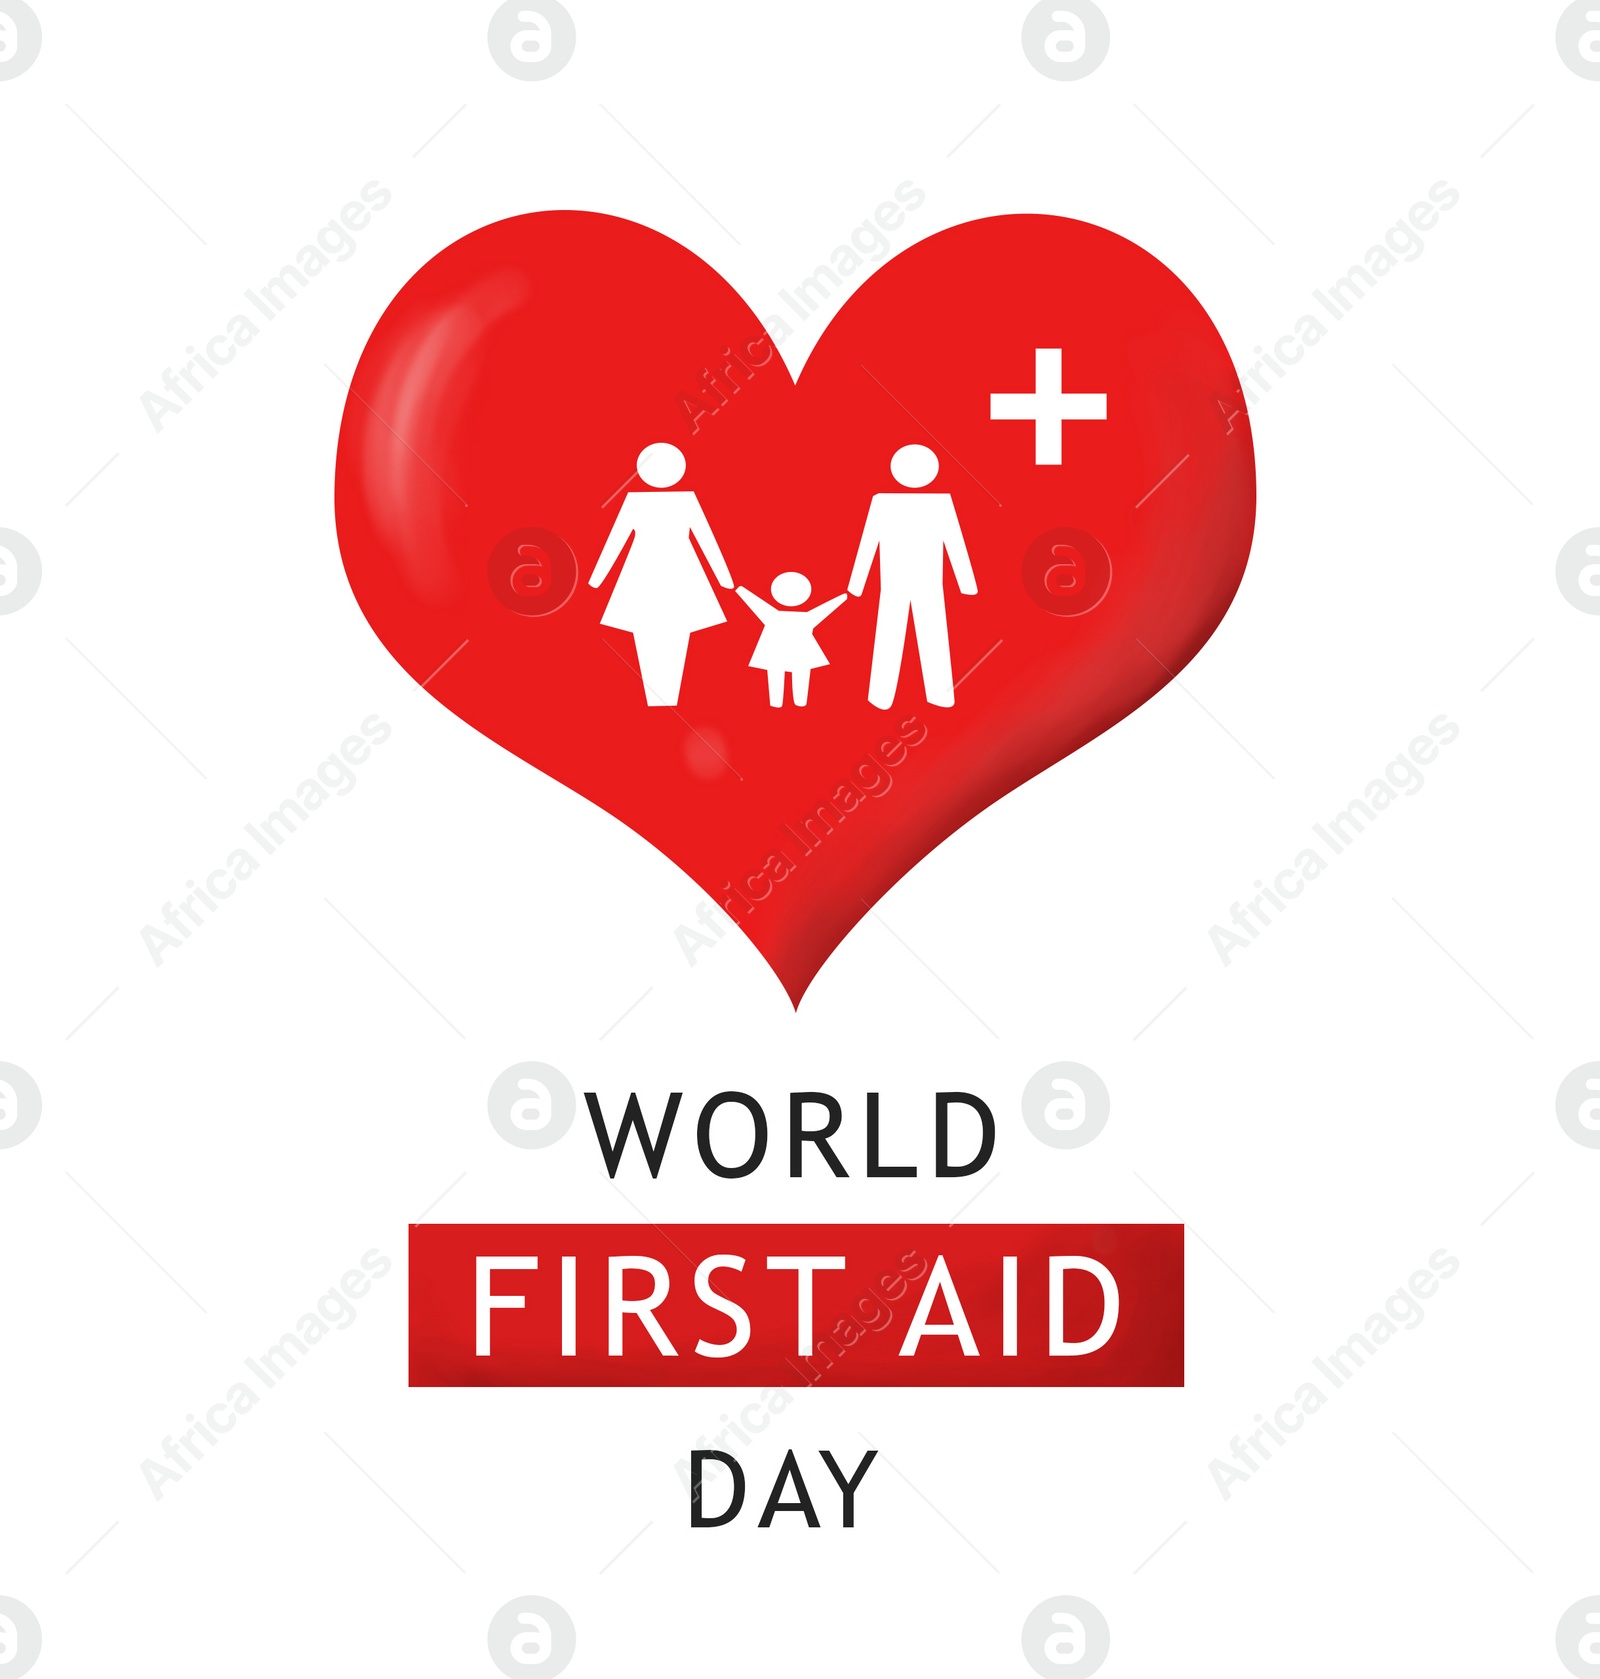 Illustration of World First Aid Day. Red heart and silhouettes of family on white background